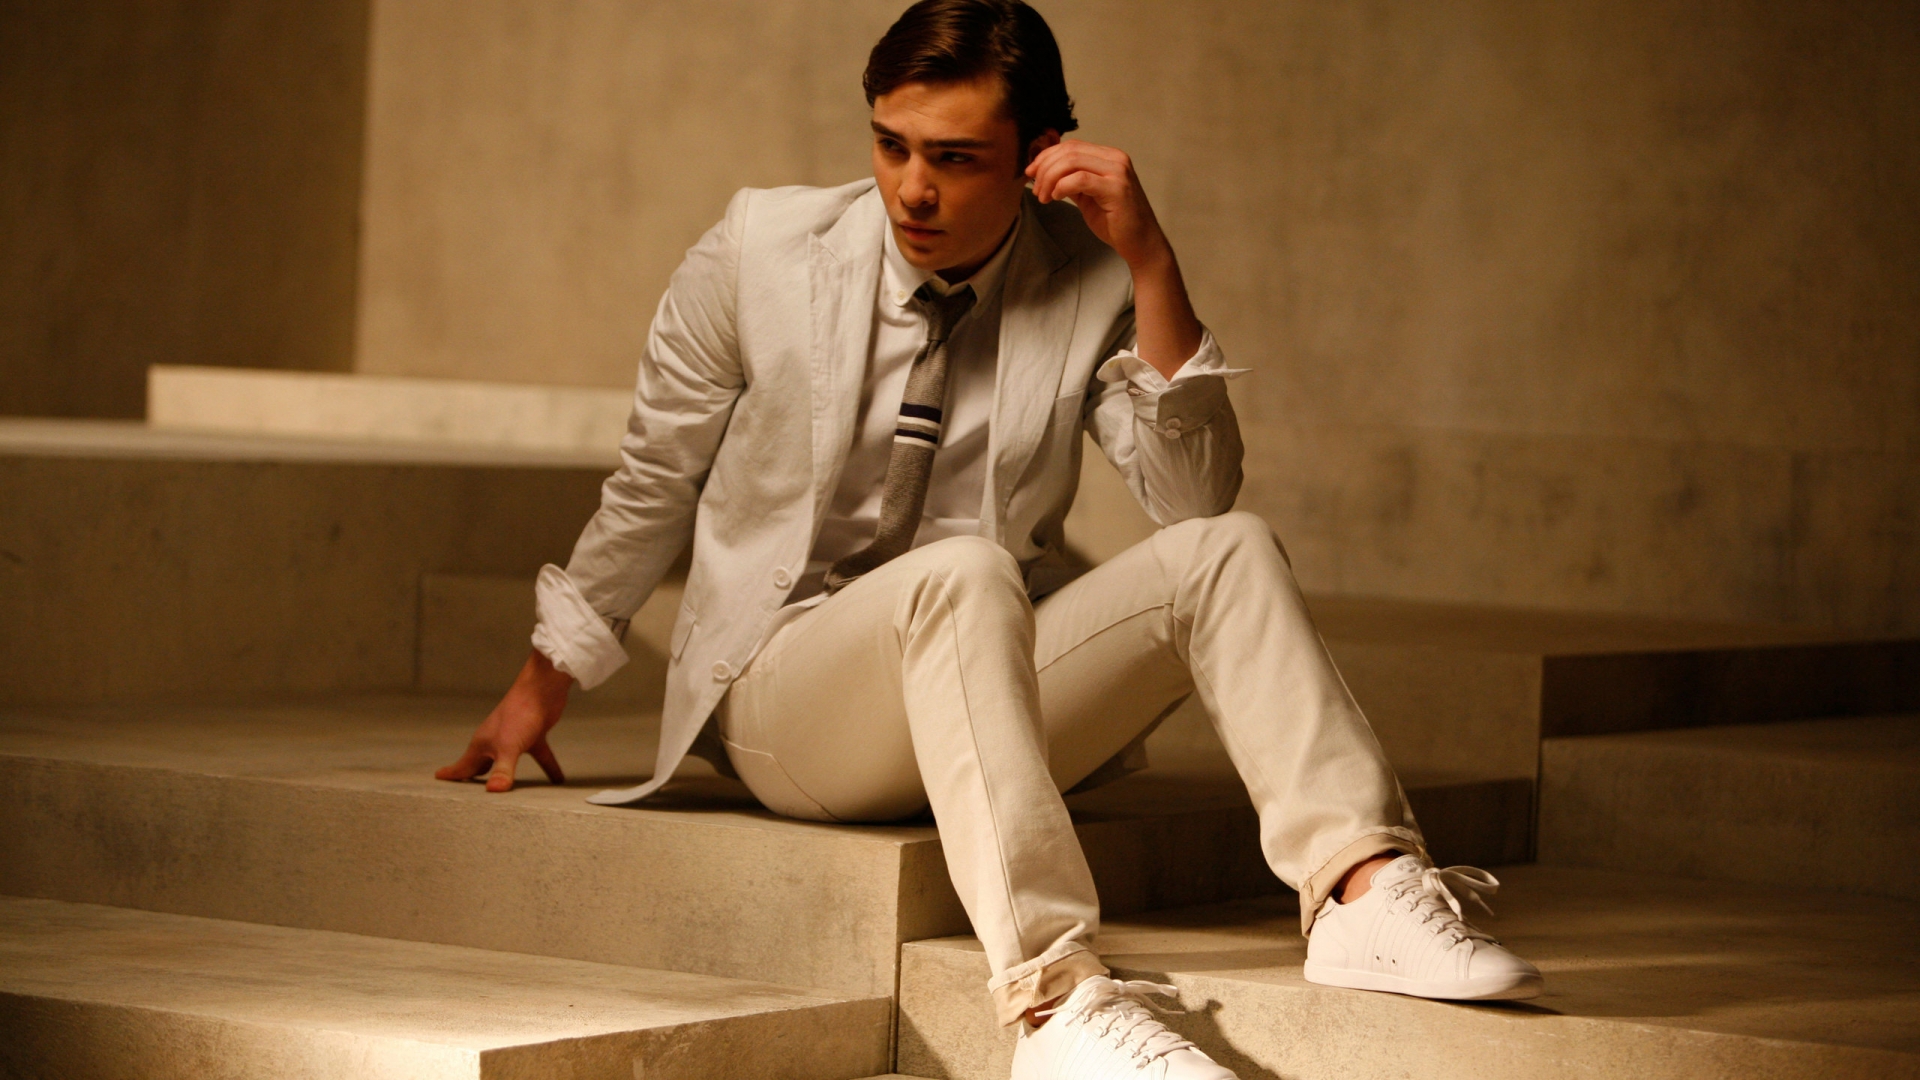 Ed Westwick for 1920 x 1080 HDTV 1080p resolution